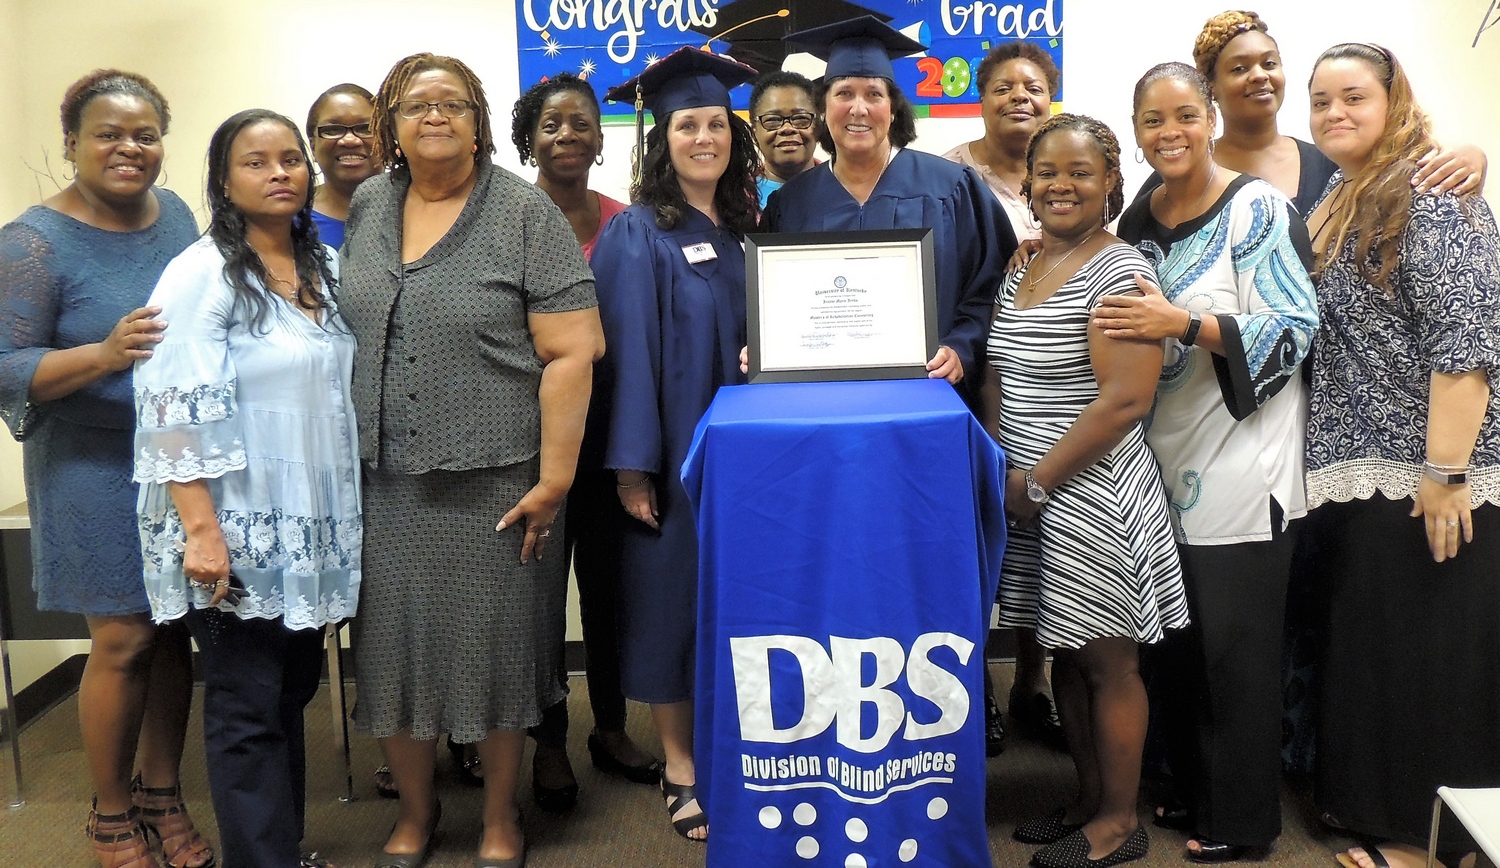 DBS Staff surrounding Jeanne Jenks, who is wearing a blue cap and gown 